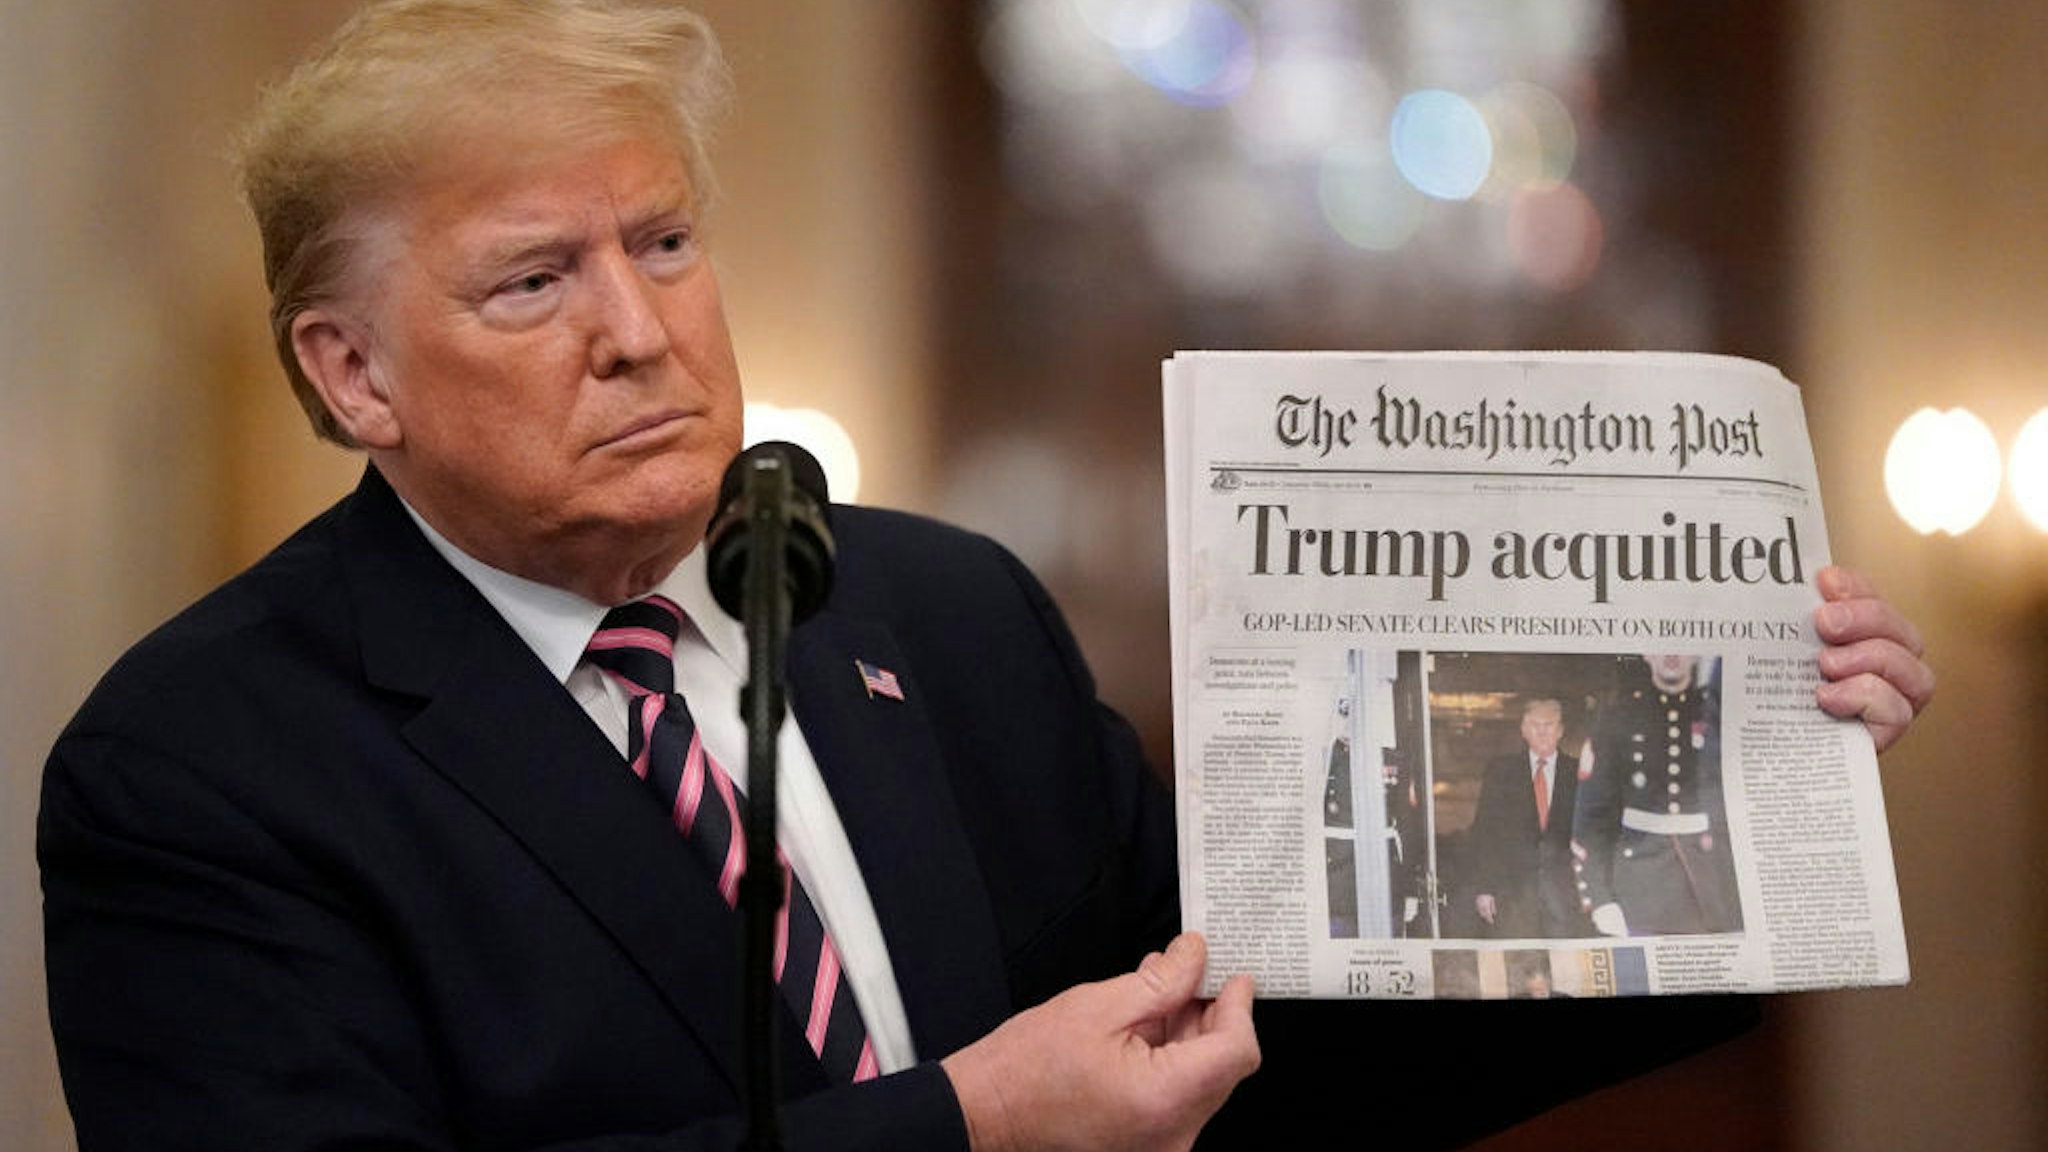 WASHINGTON, DC - FEBRUARY 06: U.S. President Donald Trump holds a copy of The Washington Post as he speaks in the East Room of the White House one day after the U.S. Senate acquitted on two articles of impeachment, ion February 6, 2020 in Washington, DC. After five months of congressional hearings and investigations about President Trump’s dealings with Ukraine, the U.S. Senate formally acquitted the president on Wednesday of charges that he abused his power and obstructed Congress. (Photo by Drew Angerer/Getty Images)